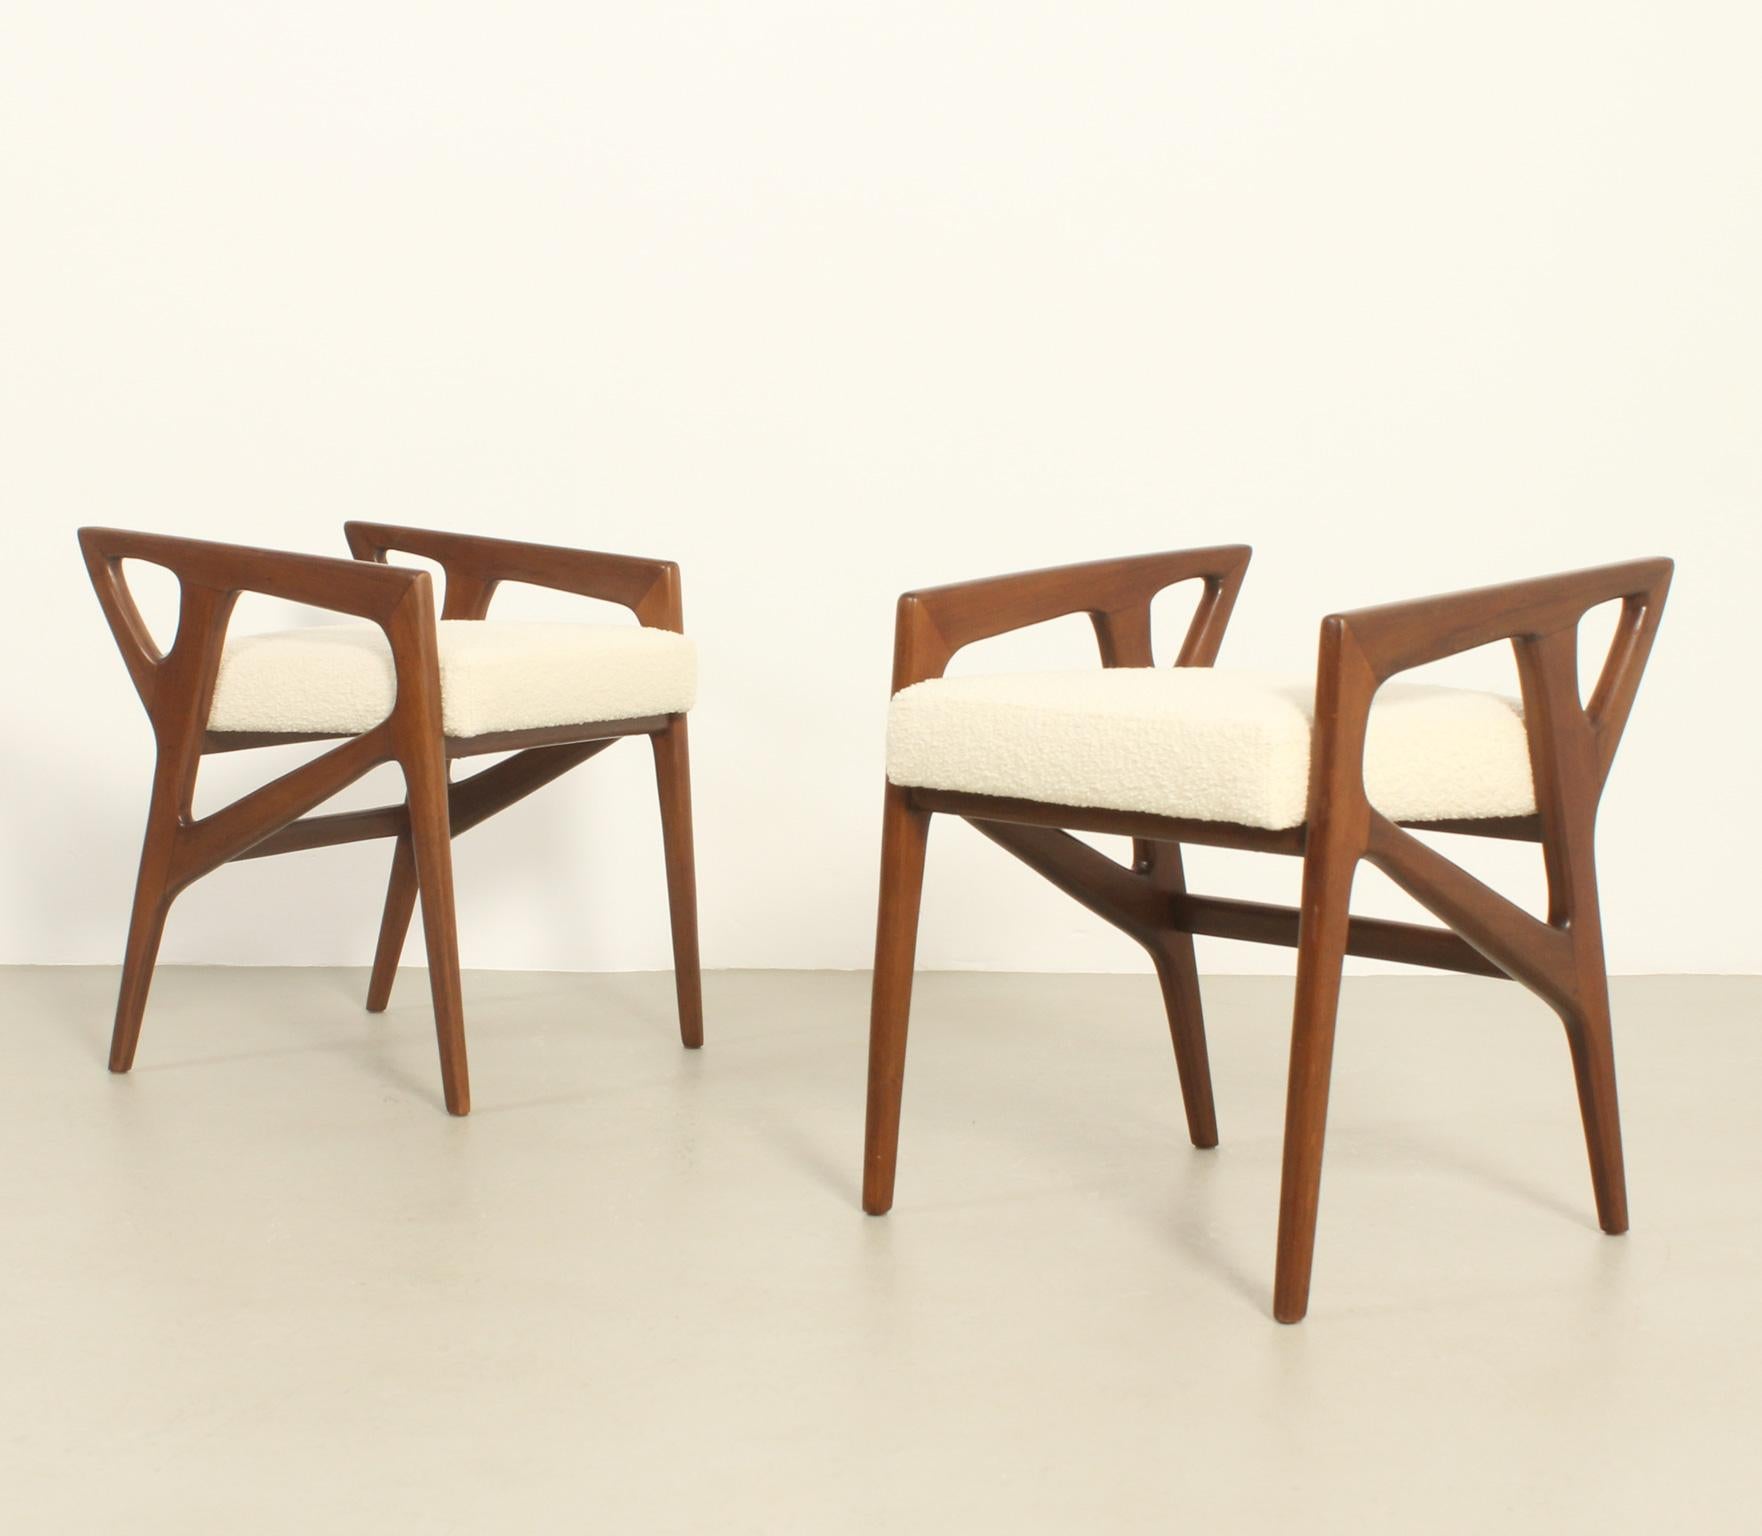 Pair of stools model 687 designed in 1953 by Gio Ponti for Cassina, Italy. Walnut wood structure and upholstered with new boucle fabric by Bisson Bruneel. 